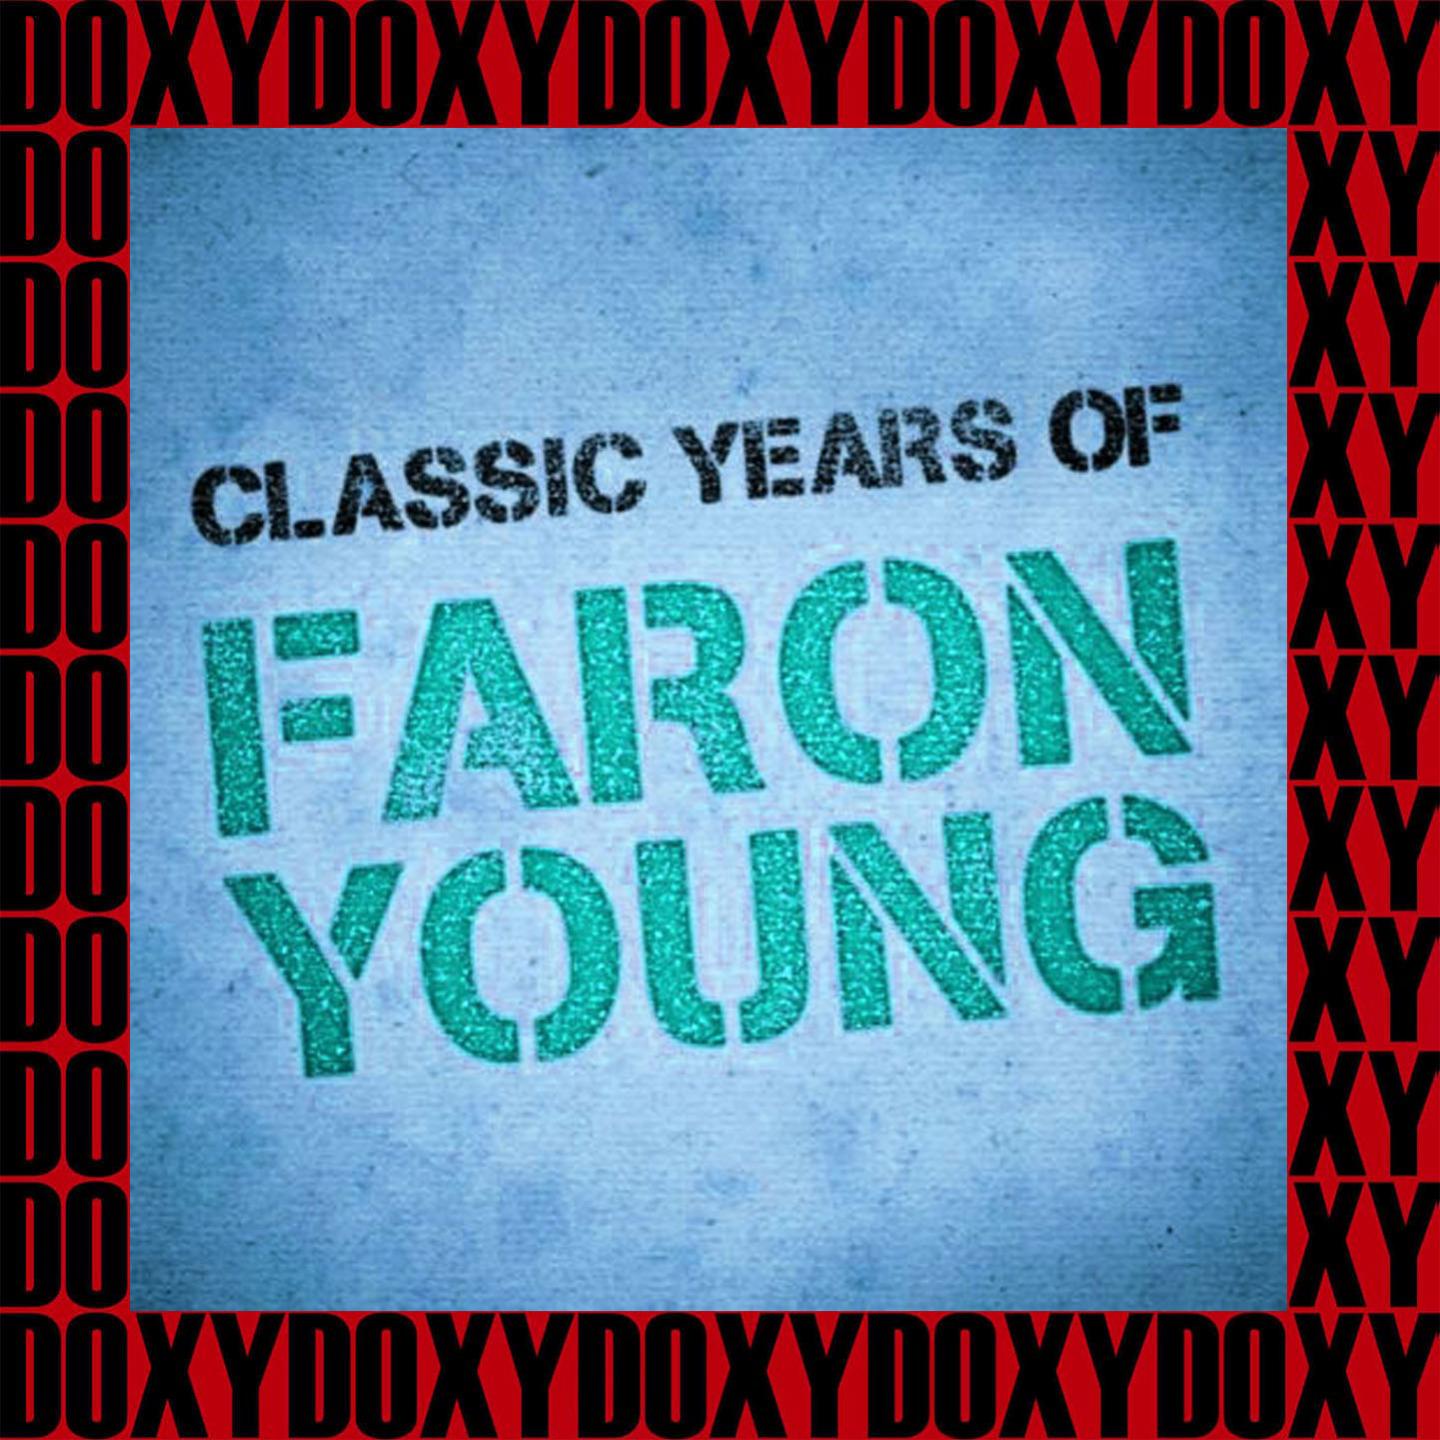 Classic Years Of Faron Young (Remastered Version) (Doxy Collection)